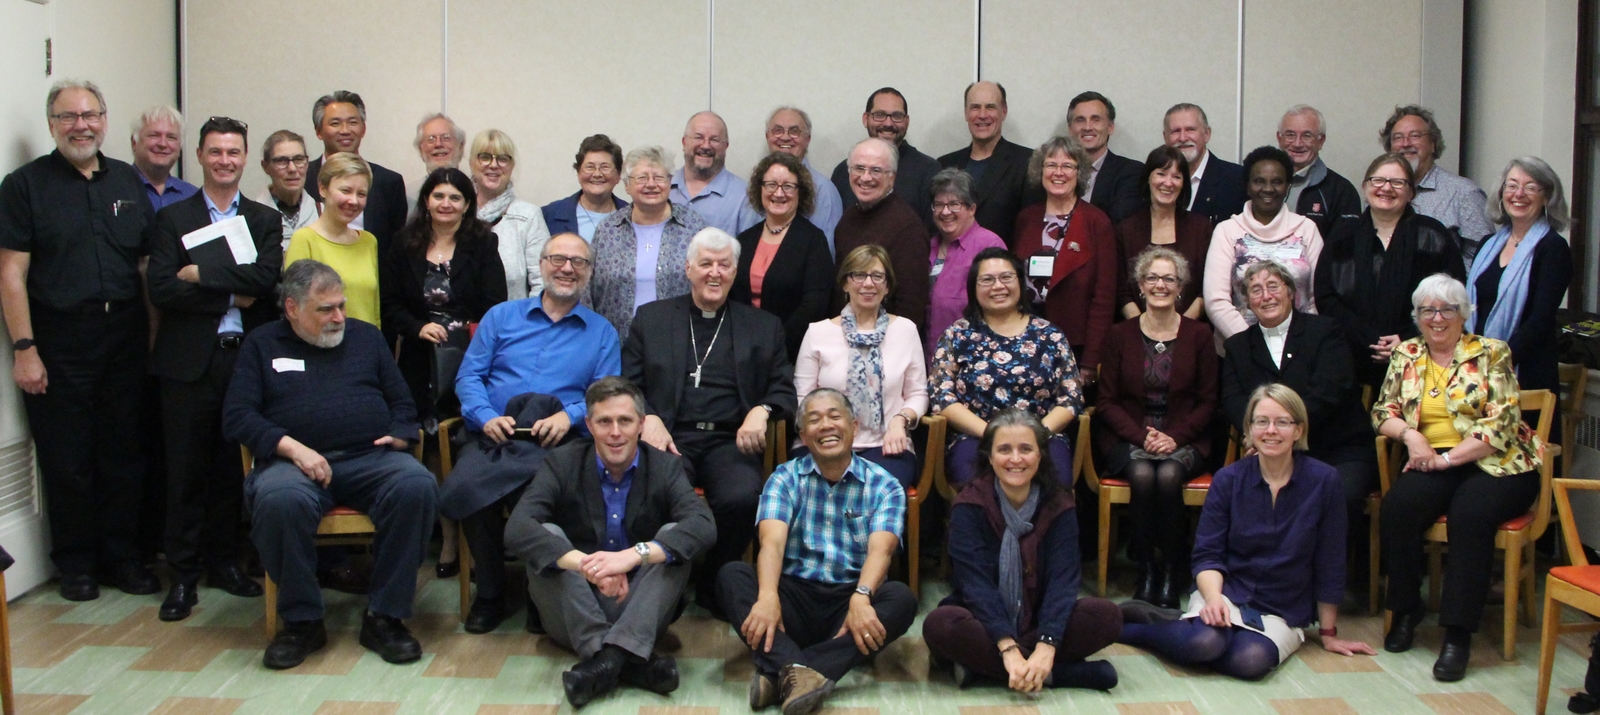 Participants in the 7th Canadian Forum on Inter-Church Dialogues, held in Montreal from October 12-13, 2018